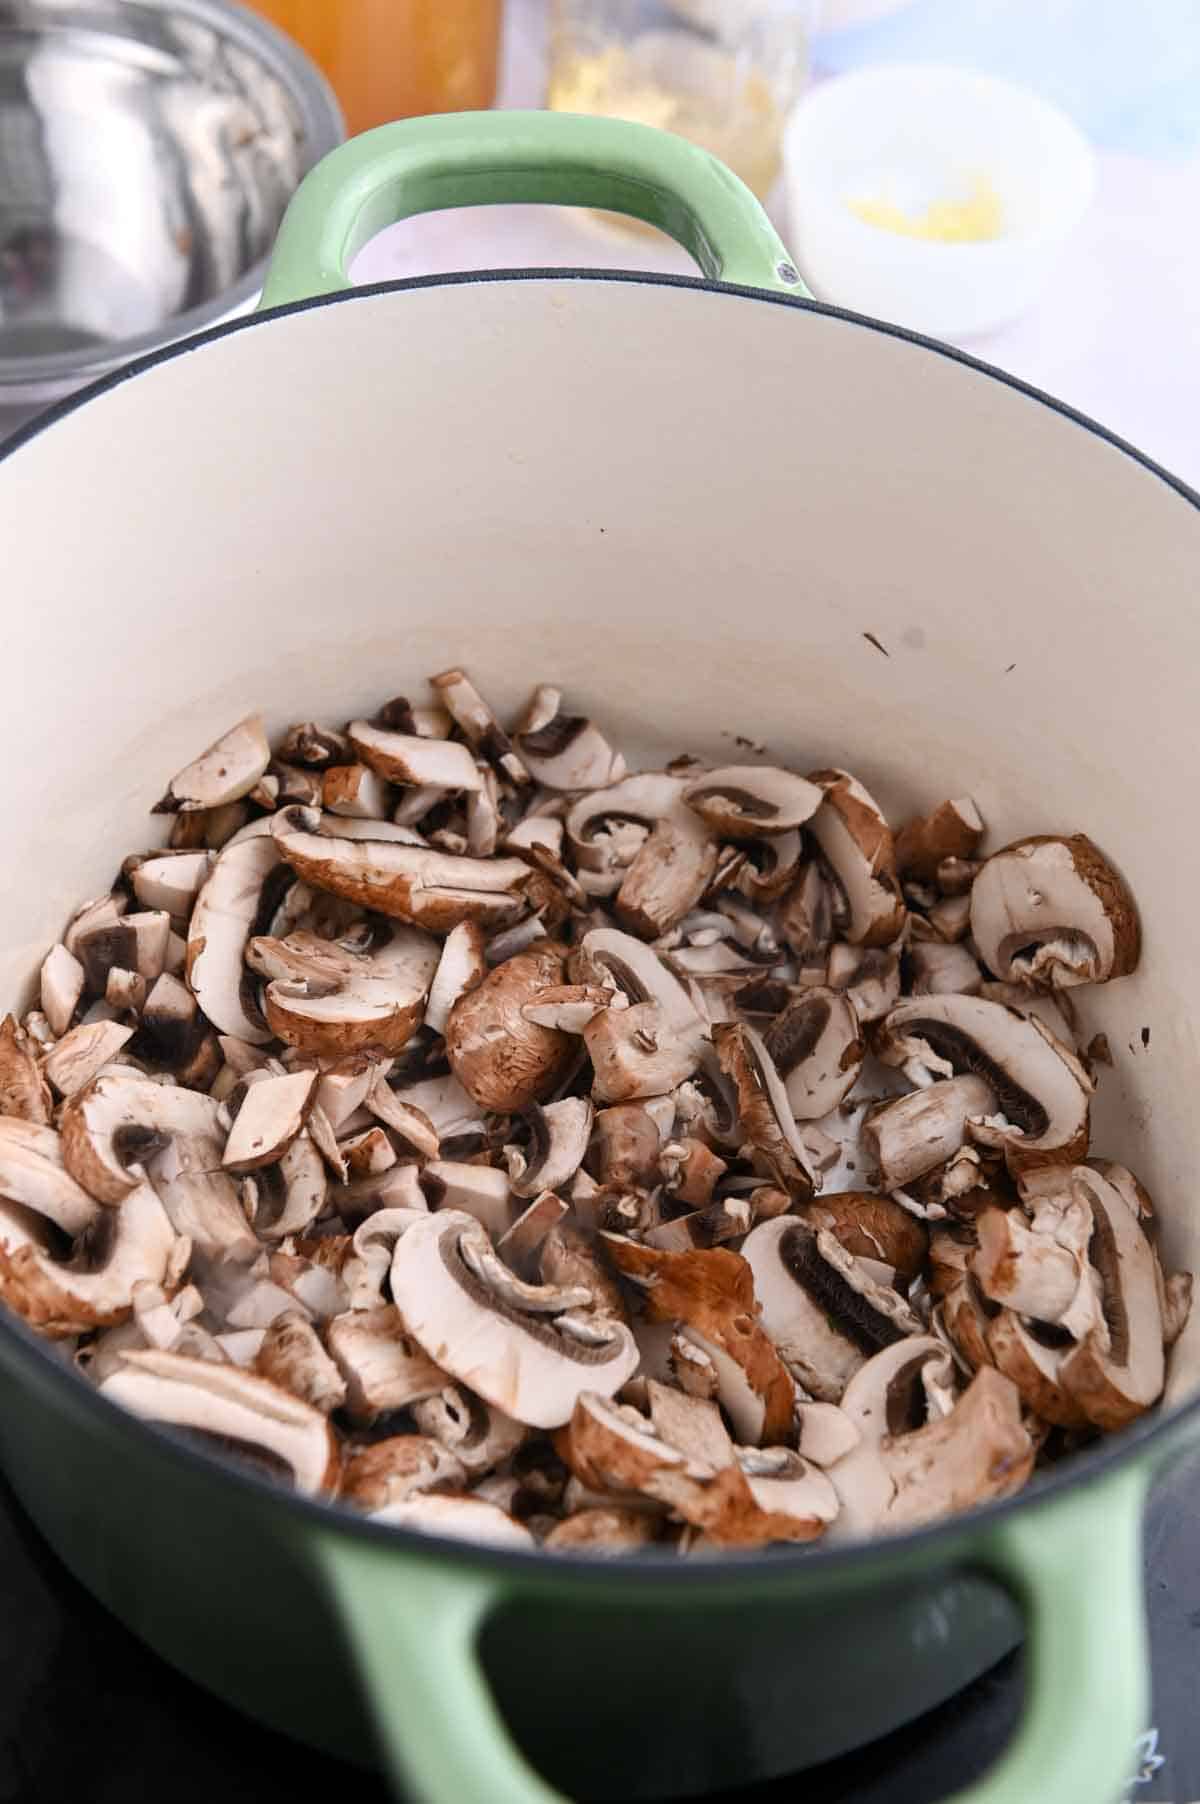 Raw sliced mushrooms in a pot before cooking.